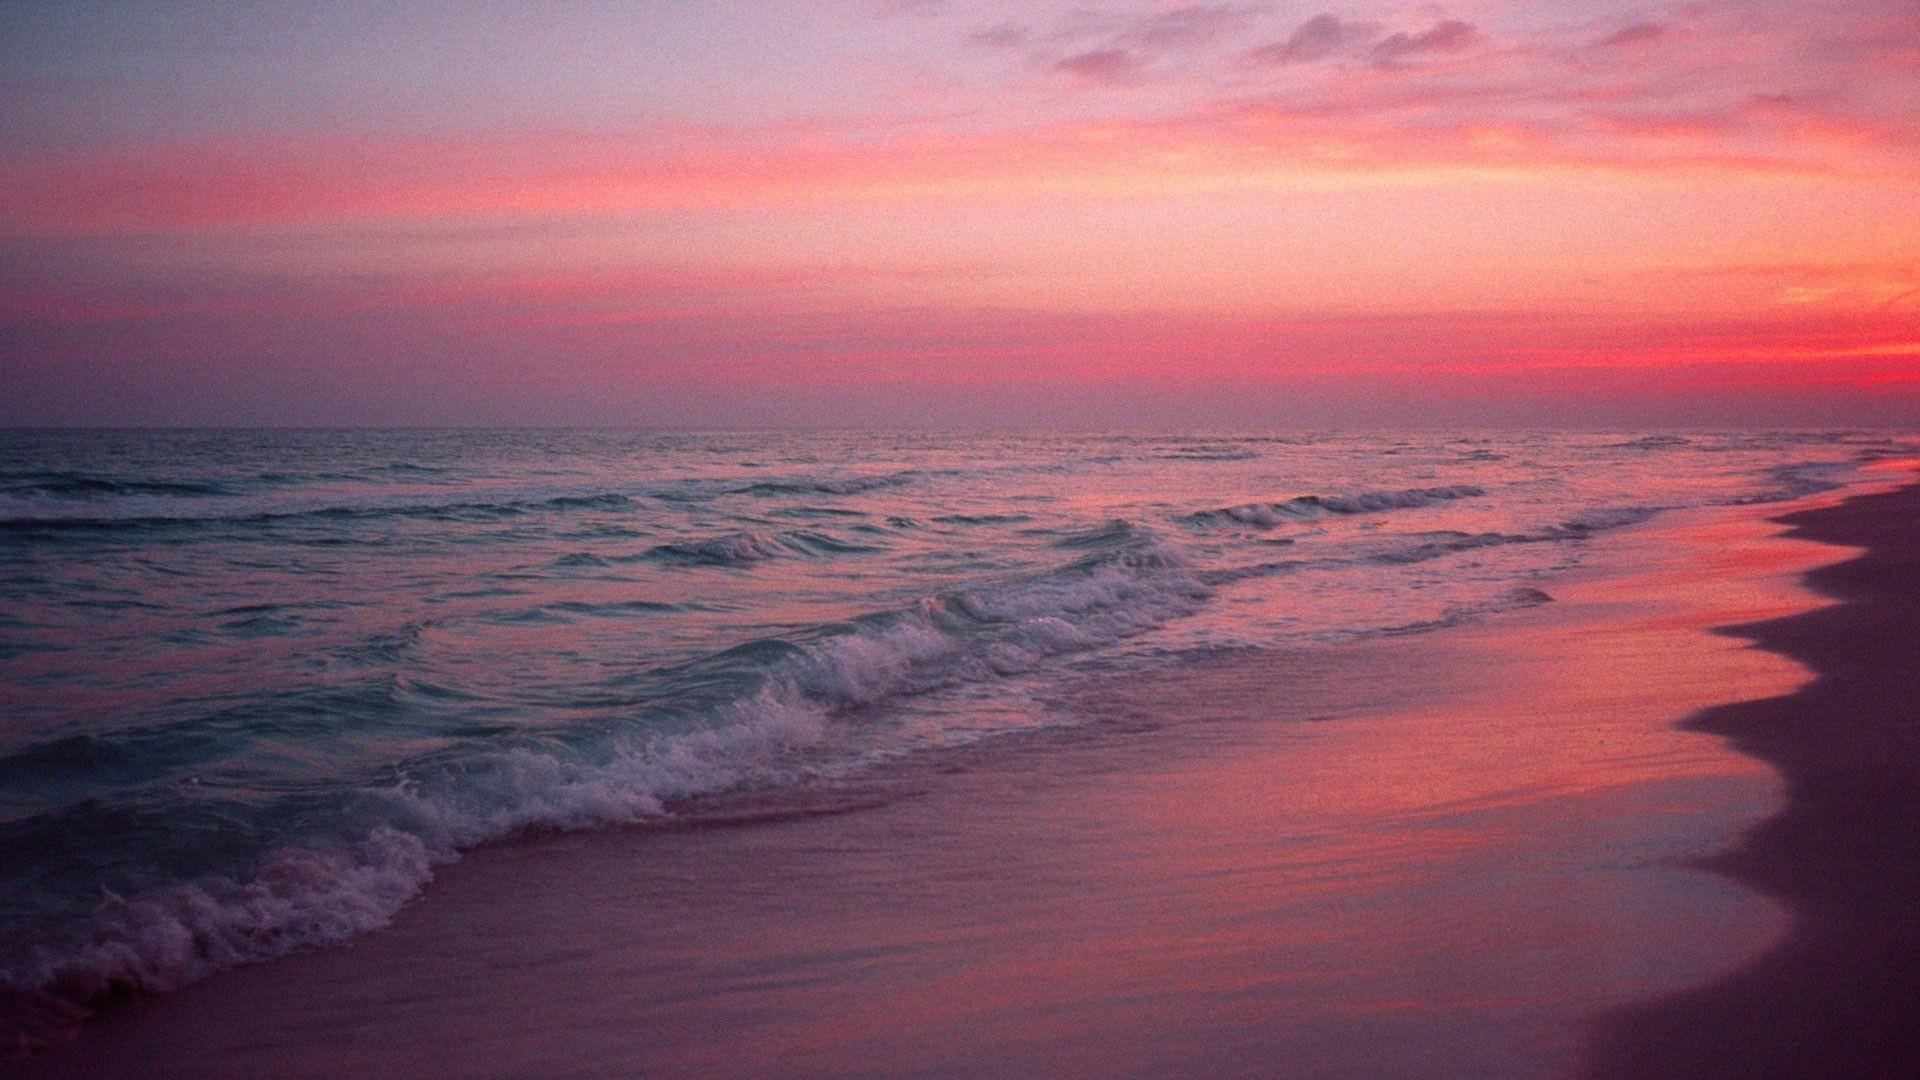 Desolated Ocean With Aesthetic Sunset